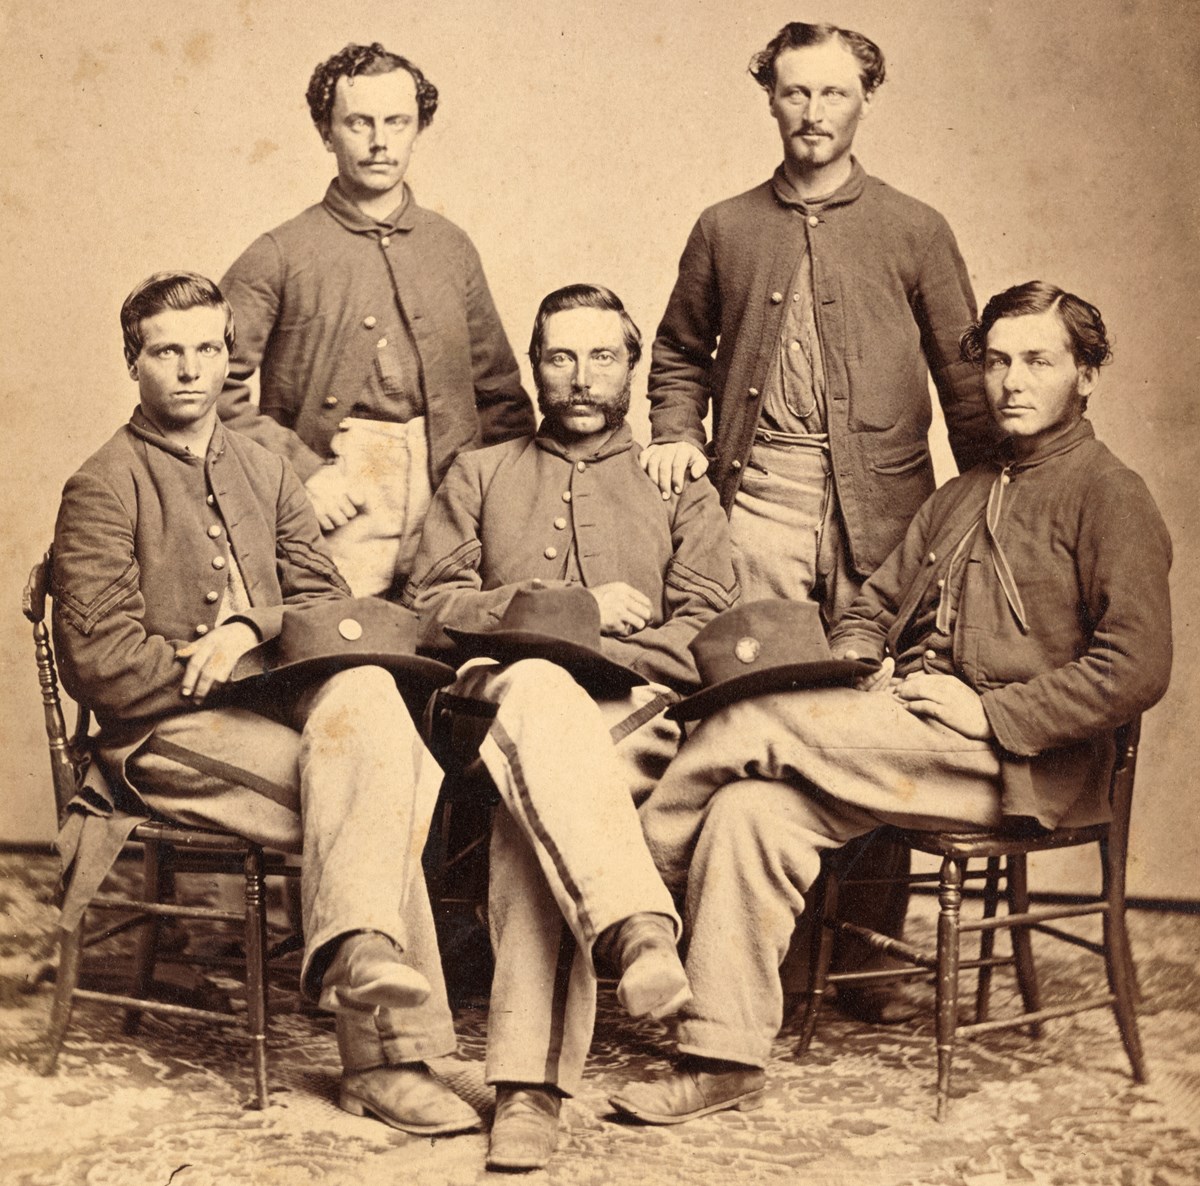 Five young United States Soldiers posing together in Civil War uniforms